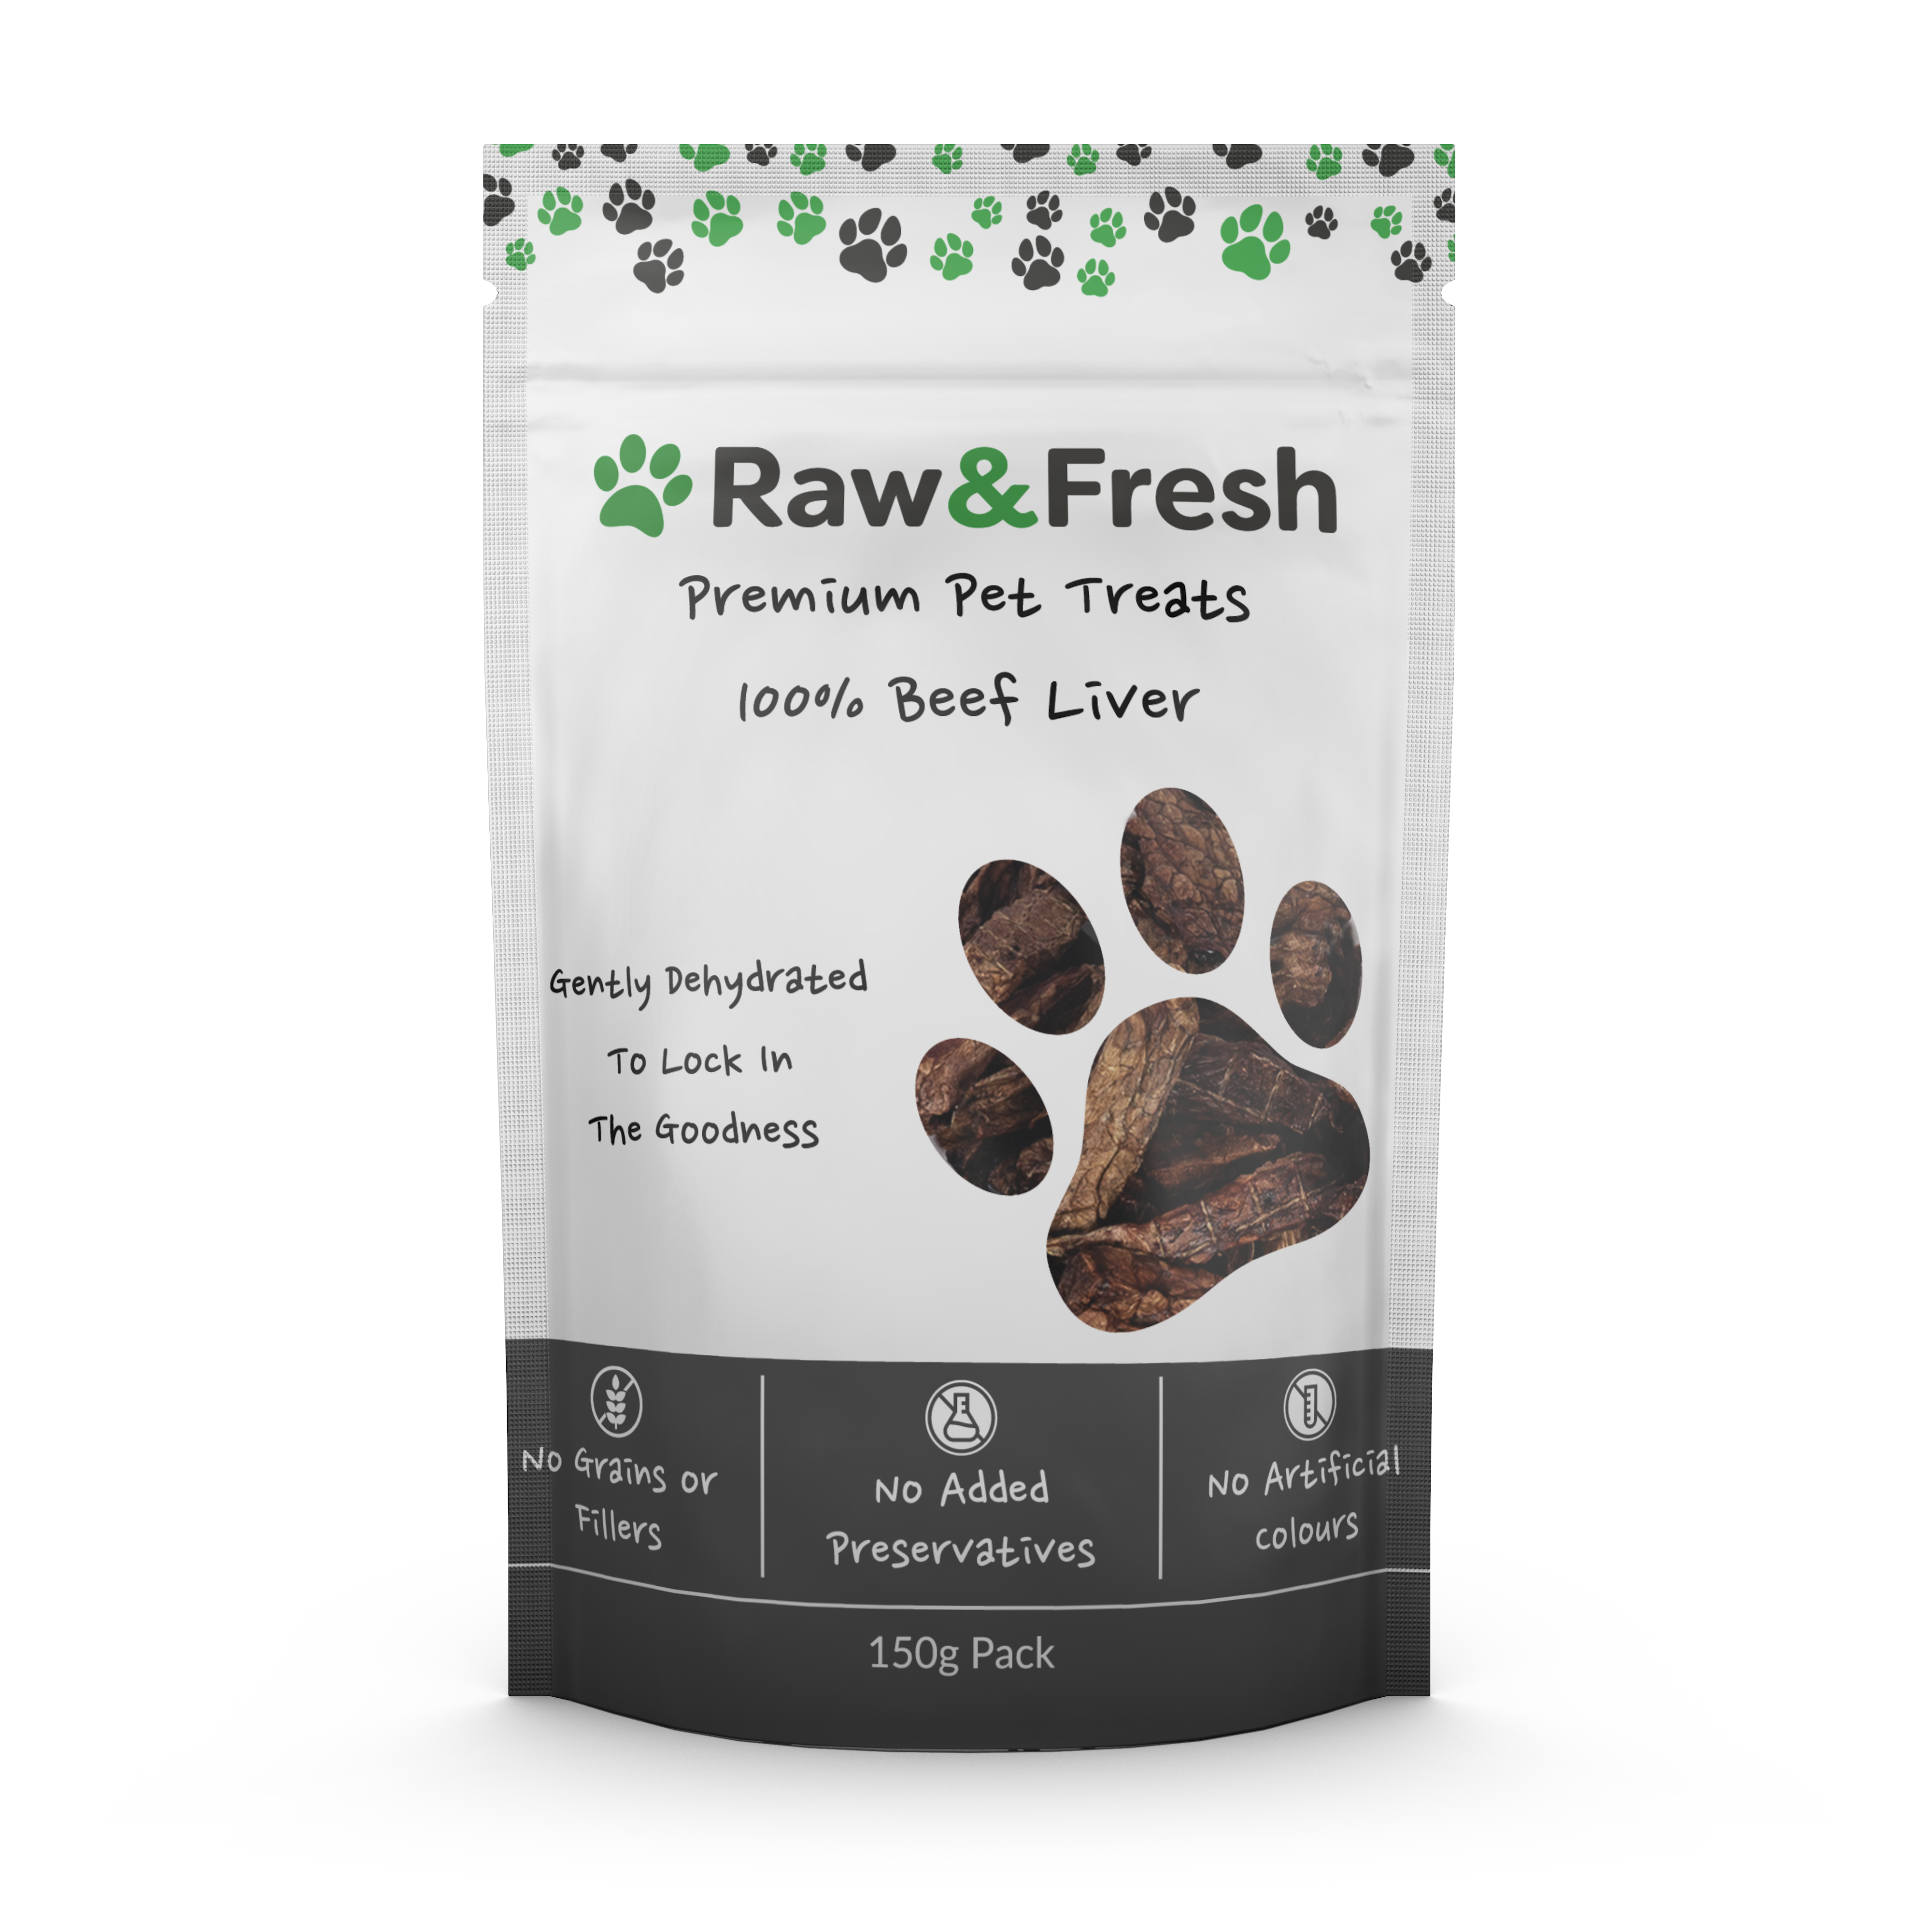 Raw & Fresh Dehydrated Beef Liver Jerky Dog Treats 150g Pack